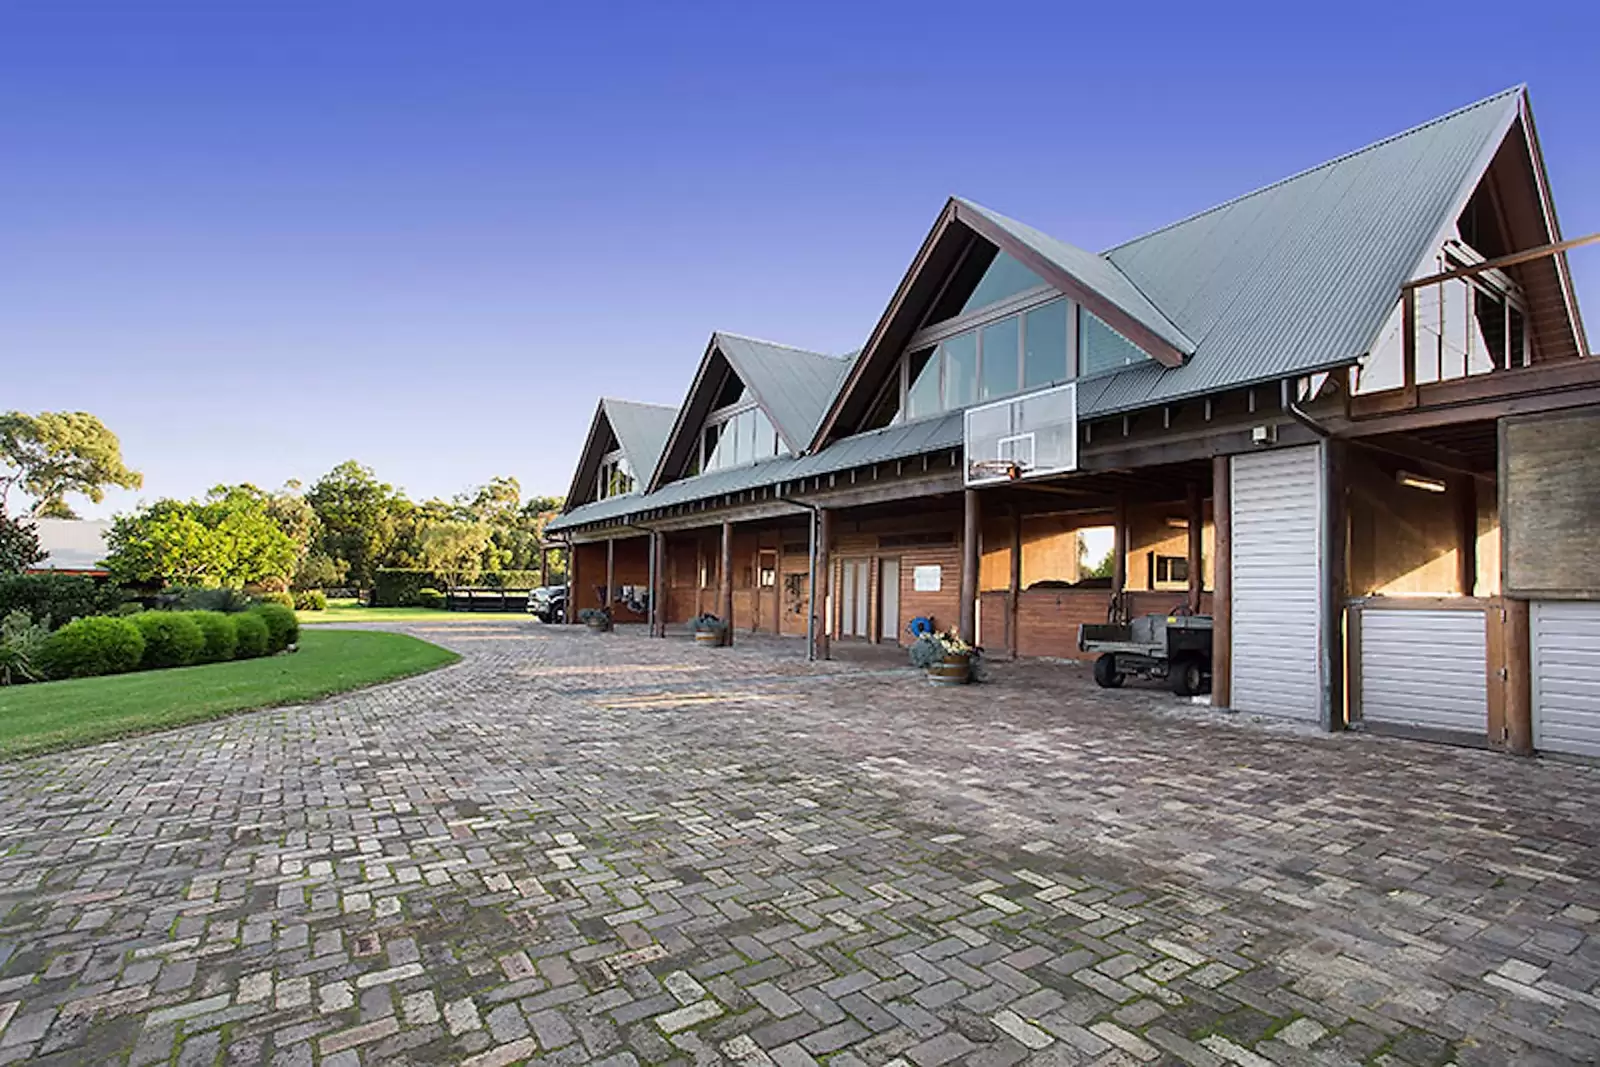 Photo #4: 394 Wyong Road, Duffys Forest - Sold by Sydney Sotheby's International Realty